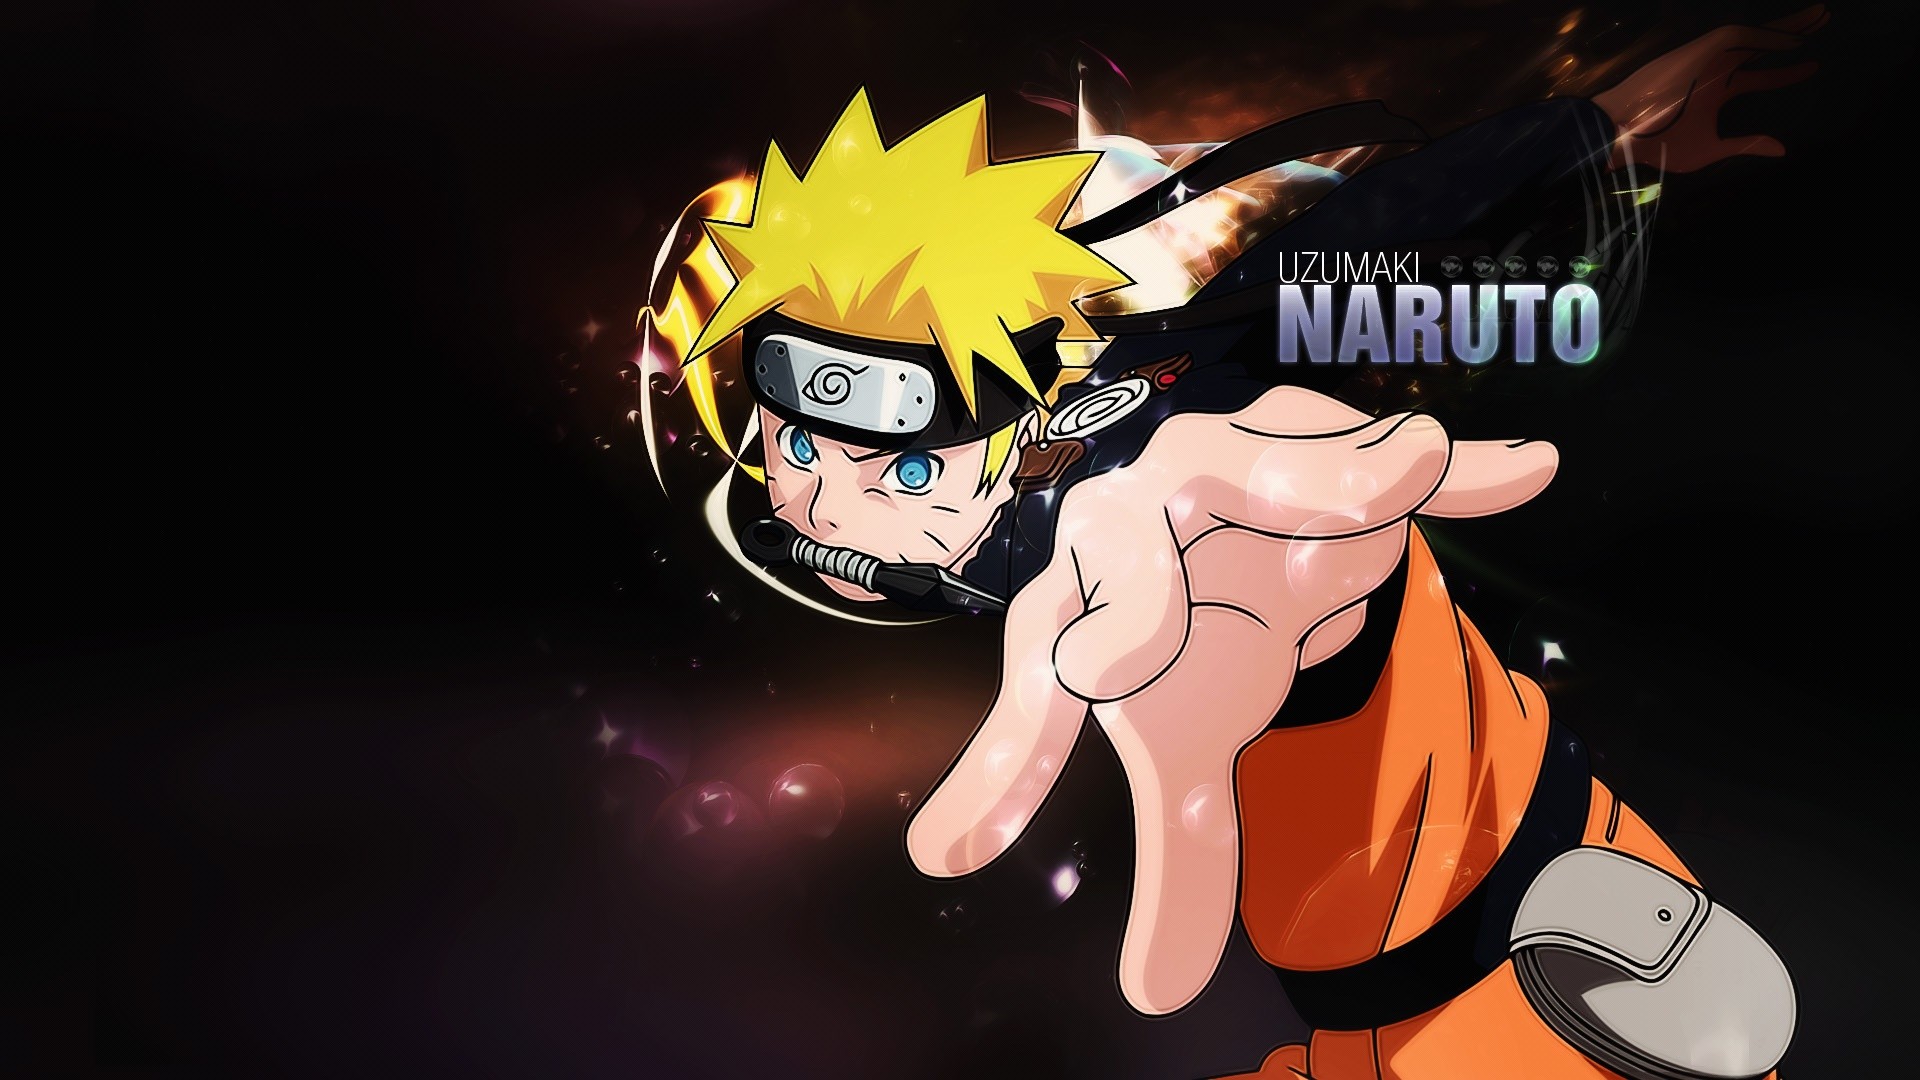 Naruto For Desktop Wallpaper with high-resolution 1920x1080 pixel. You can use this poster wallpaper for your Desktop Computers, Mac Screensavers, Windows Backgrounds, iPhone Wallpapers, Tablet or Android Lock screen and another Mobile device